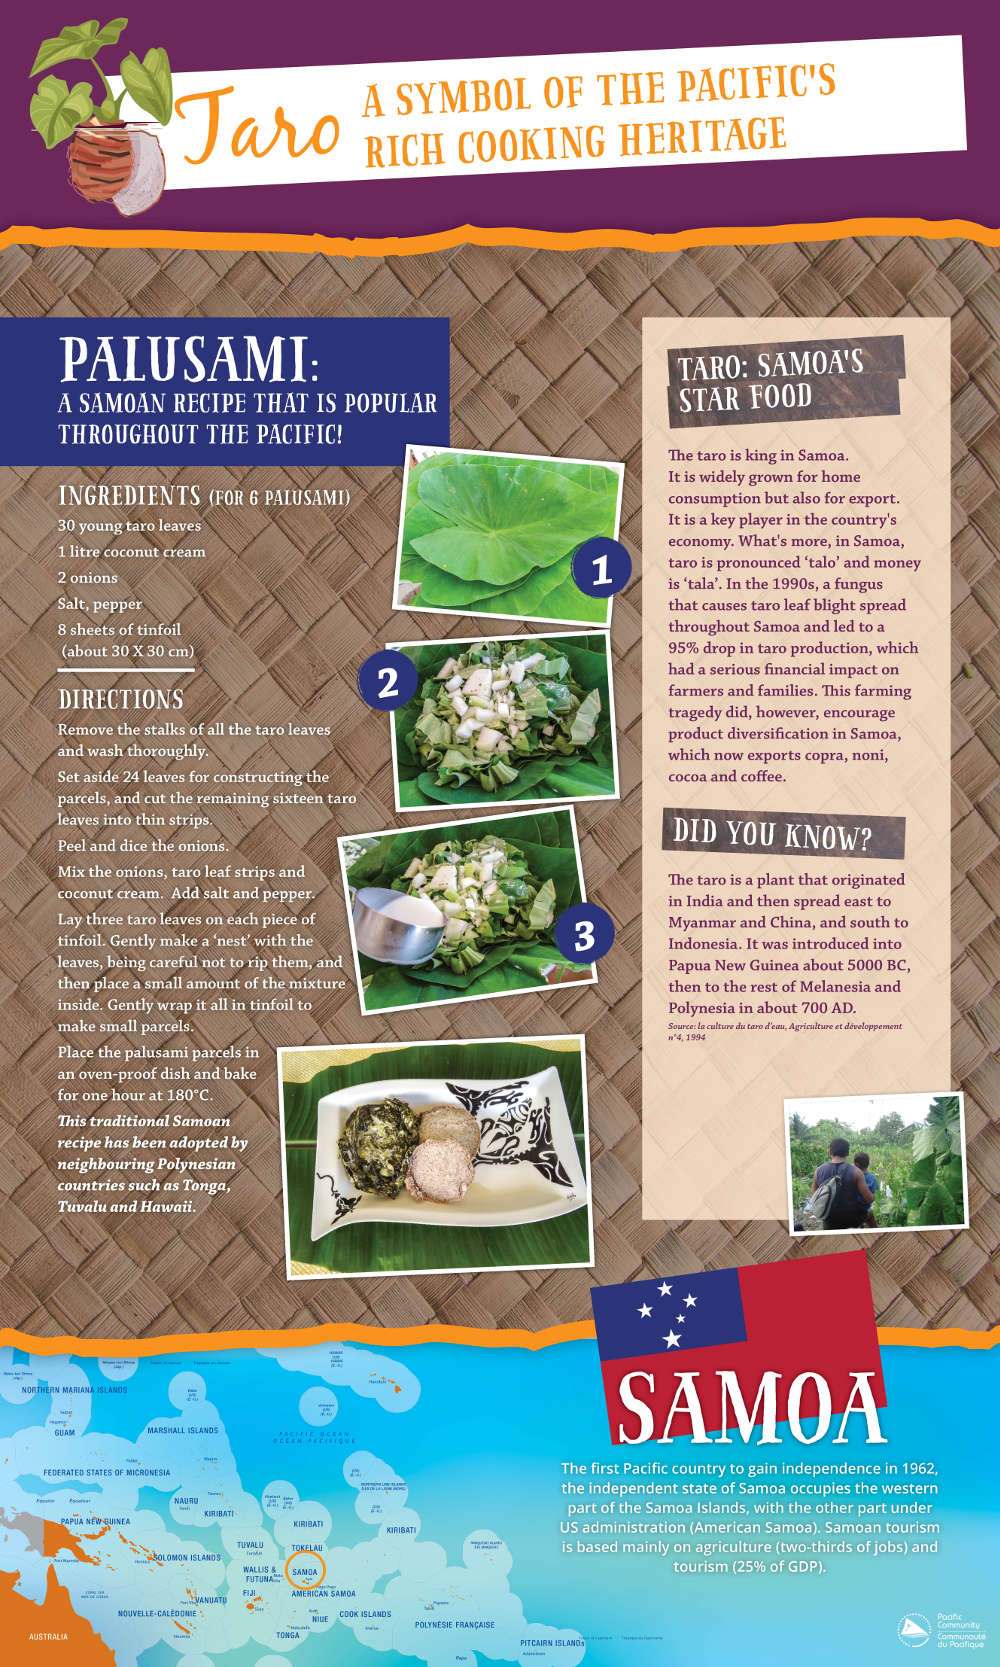 Palusami: A Samoan recipe that is popular throughout the Pacific!